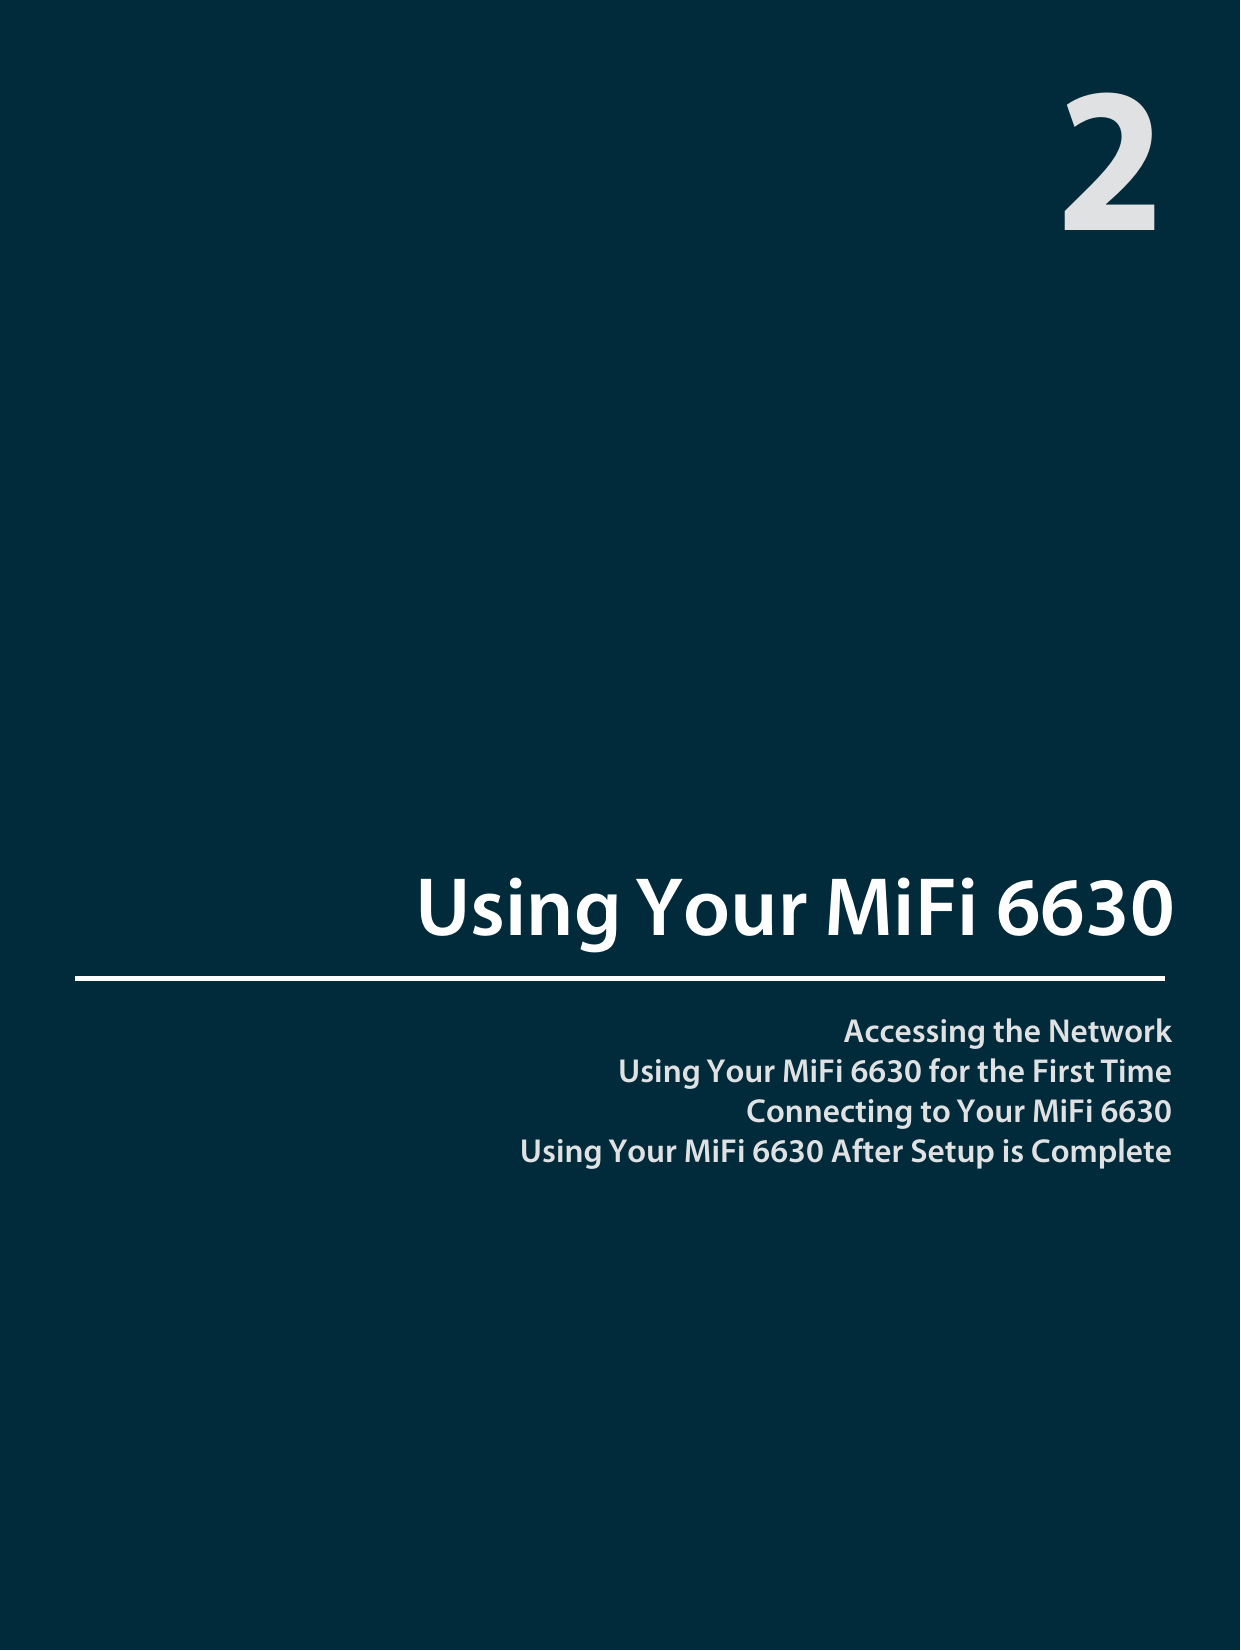 Accessing the NetworkUsing Your MiFi 6630 for the First Time Connecting to Your MiFi 6630Using Your MiFi 6630 After Setup is CompleteUsing Your MiFi 66302